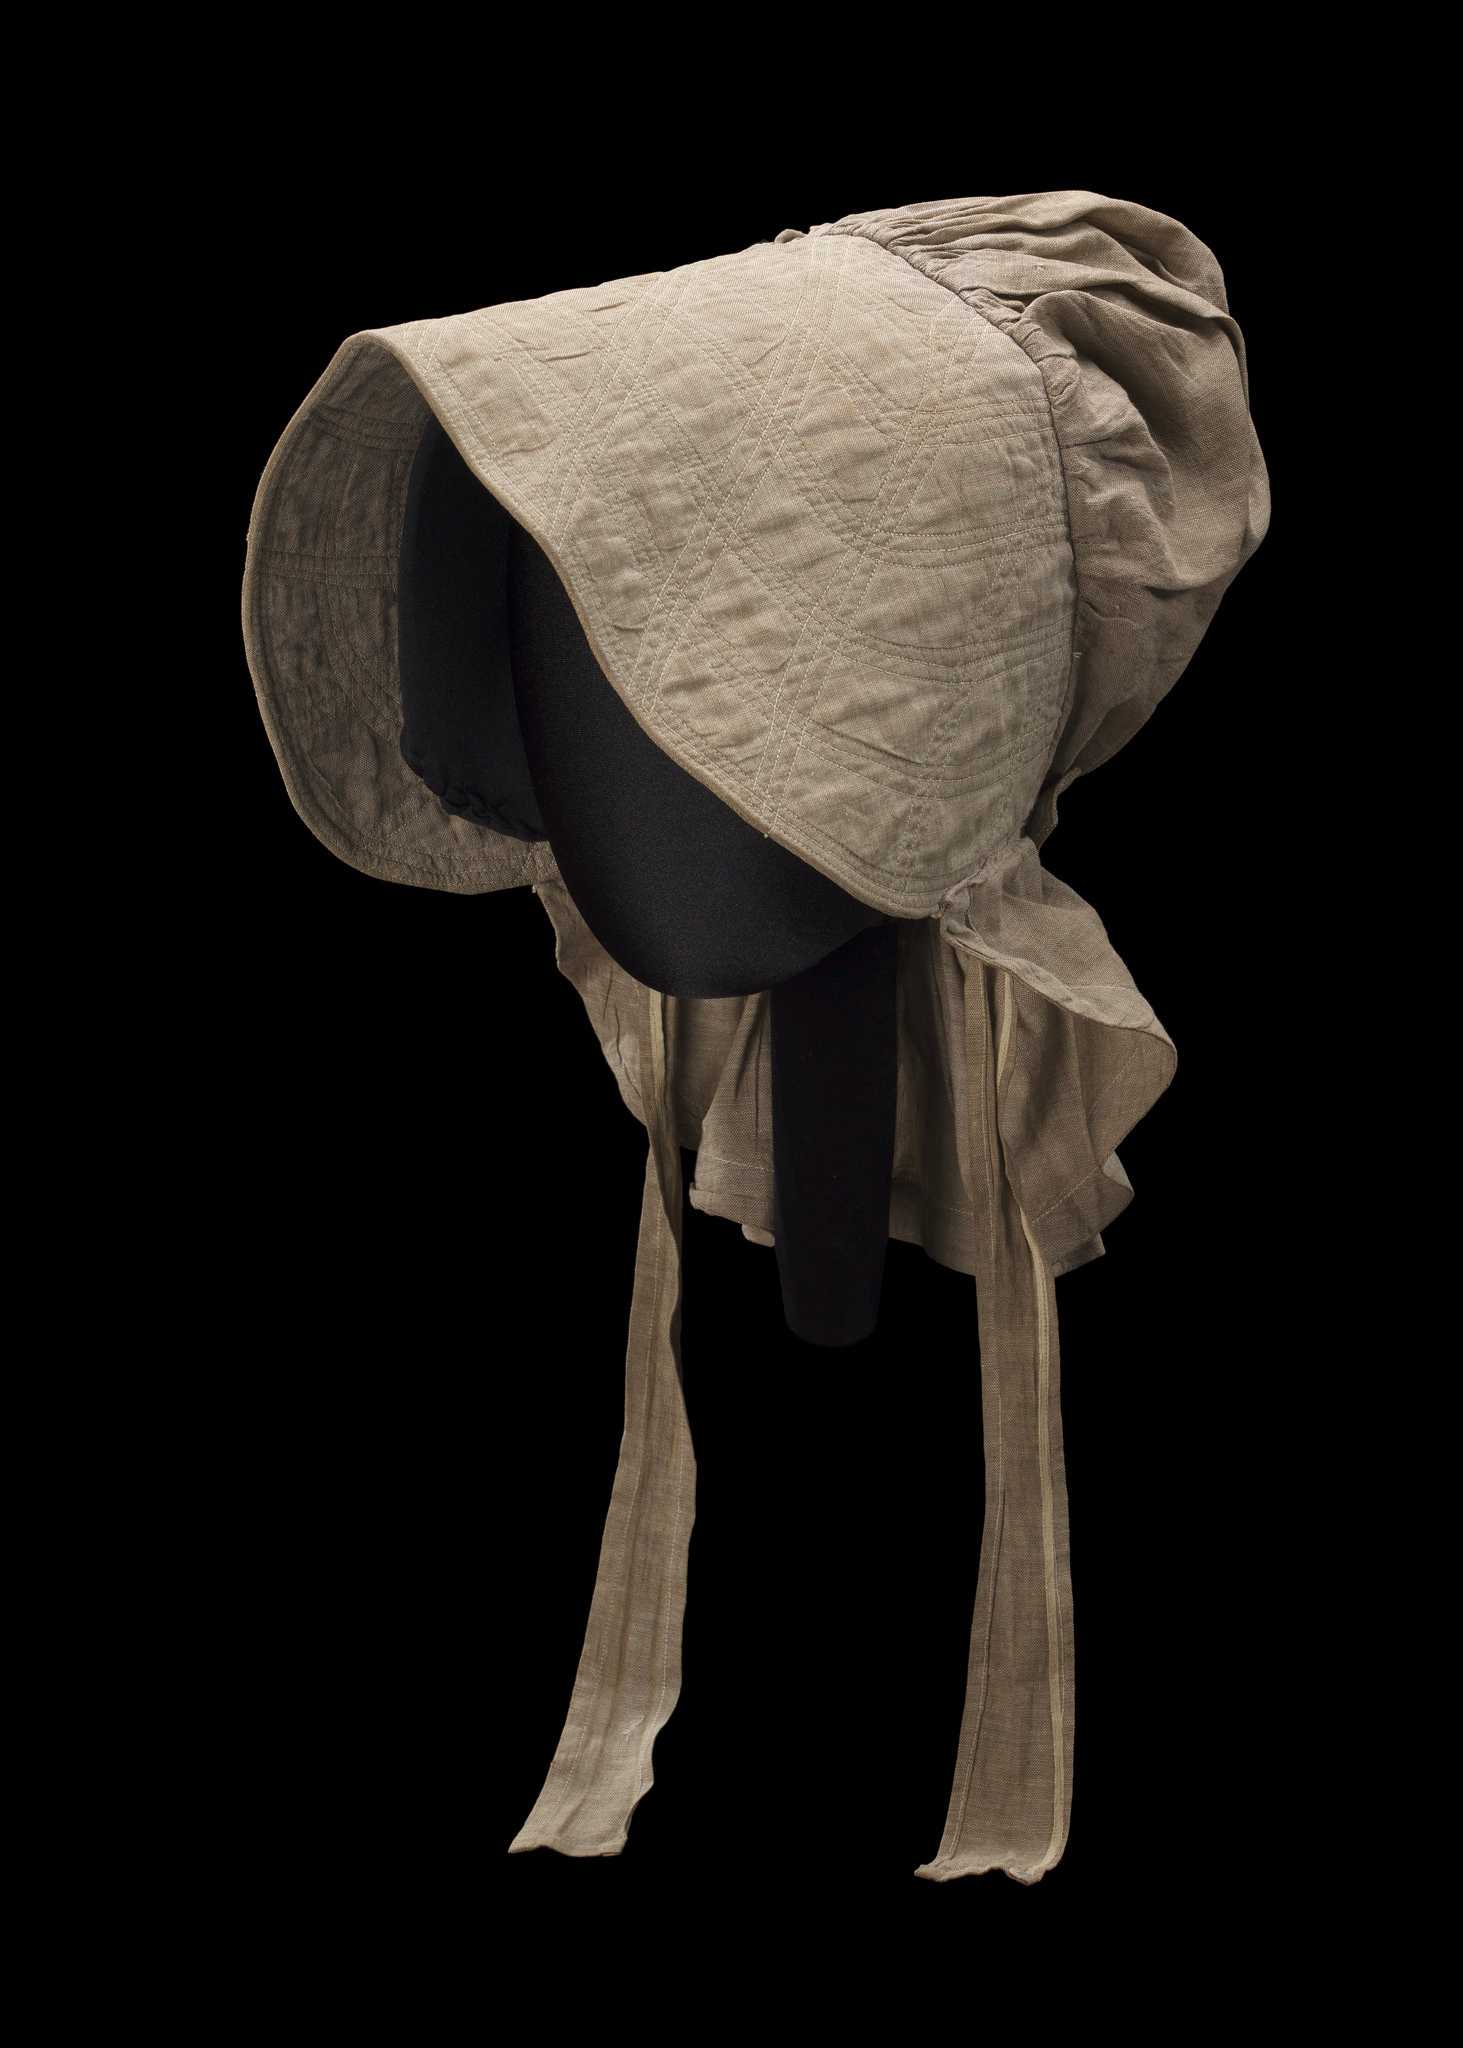 A taupe-colored bonnet with cross-stitched brim and chin straps believed to have been worn by Martha Miller Barnes while she was enslaved as a field laborer by E.A.J. Miller on his plantation near Waterproof, Louisiana.

The bonnet is a linen and cotton blend plain weave fabric. It has a short skirt that is cinched on the underside with a tied string. There is a decorative flap over the gathered portion that buttons on one side with a mother-of-pearl button. There are self-fabric short ties sewn at each interior side. The front of the bonnet has three layers, the brown linen/cotton blend is used as the facing and the lining, and there is an additional layer of  plain undyed muslin that is peeking out on the underside of the seam. The front is heavily stitched with off-white thread to make it stiff. It is machine sewn. There are some minimal brown spot stains concentrated in a scattered manner on the underside of the brim. The brim is creased at the center from being folded.